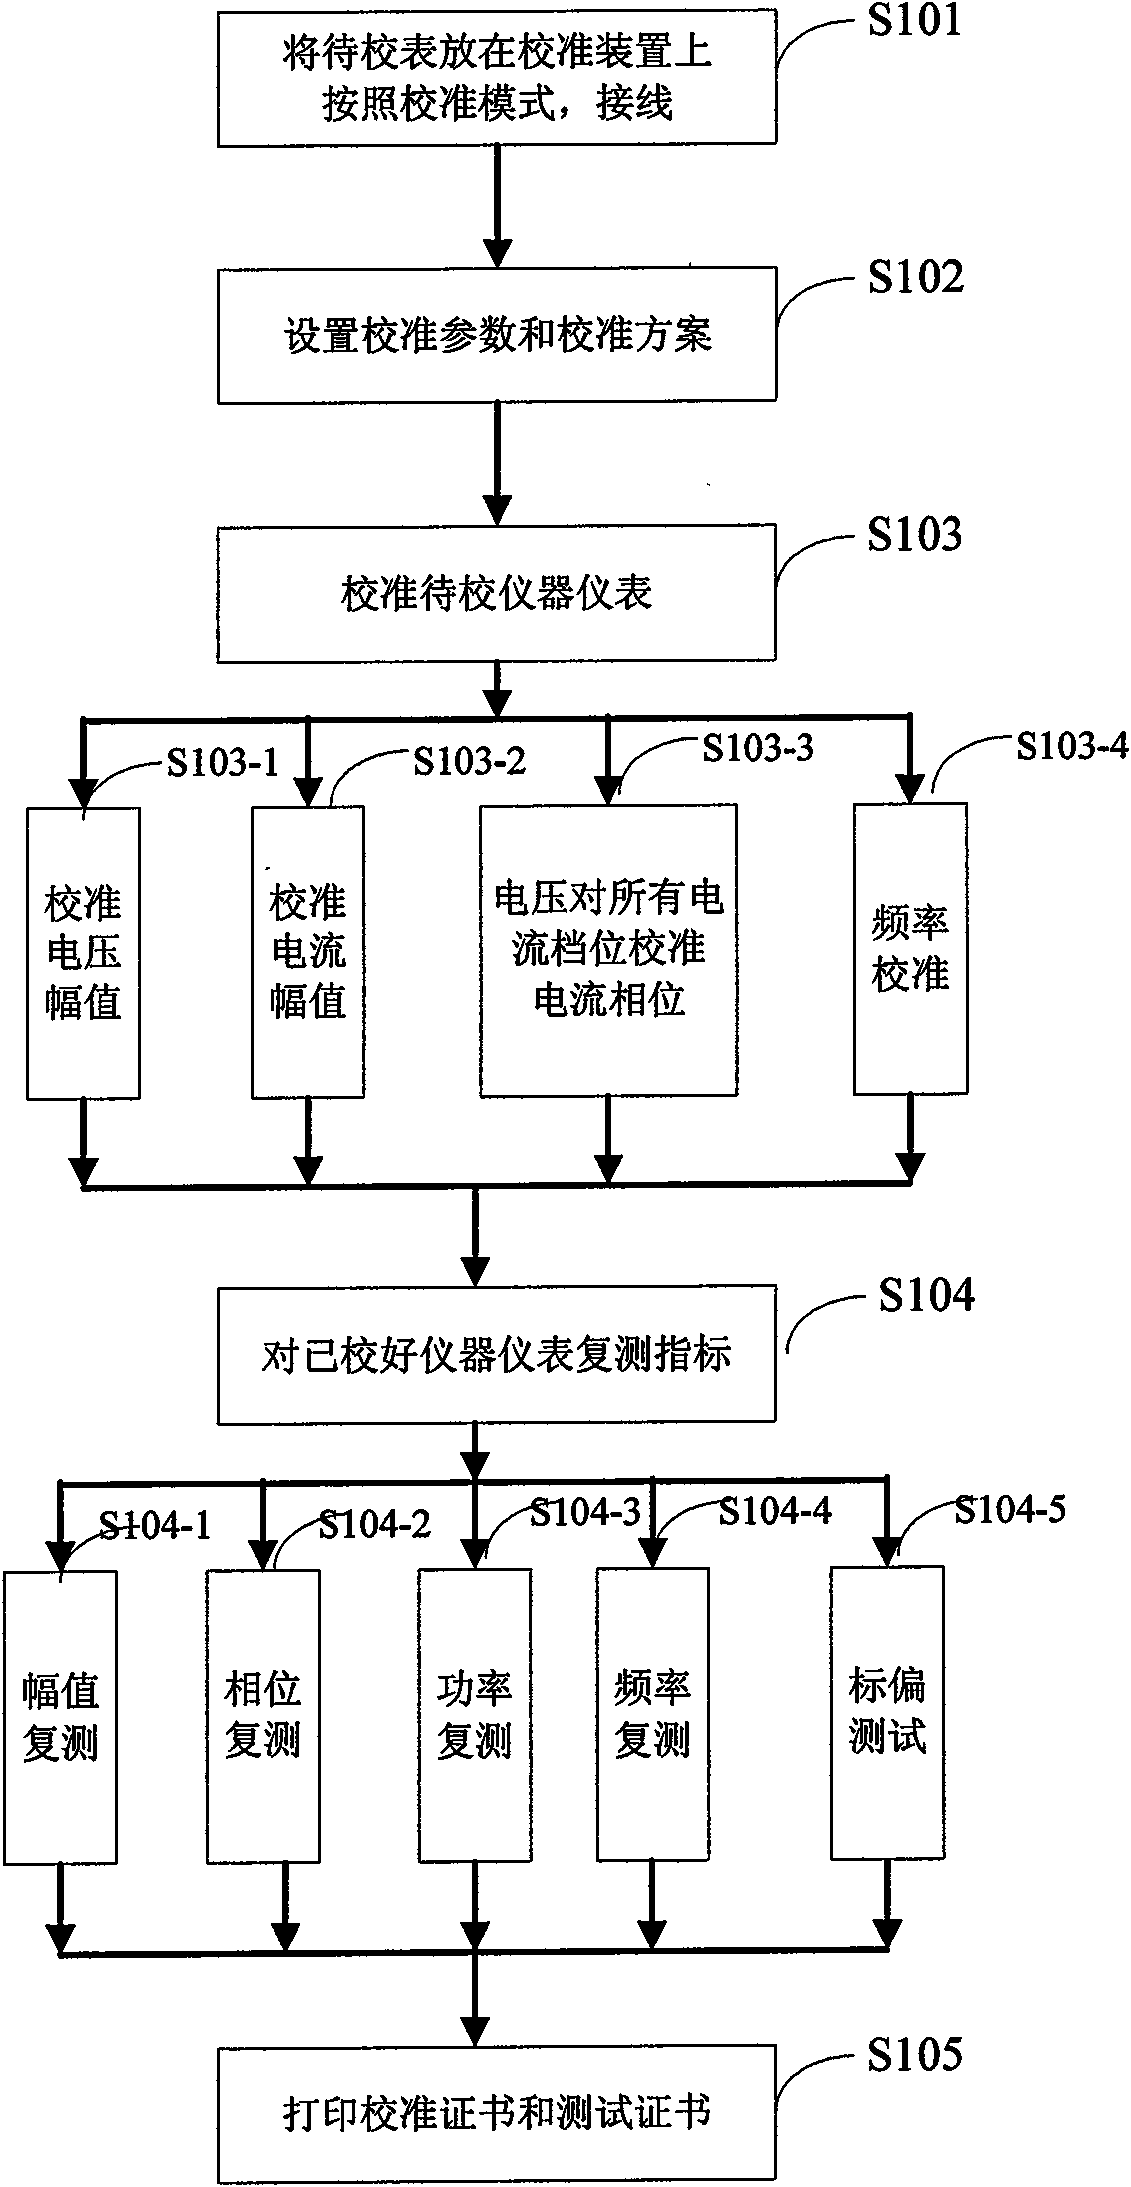 Method and system for automatically calibrating electrical instrument